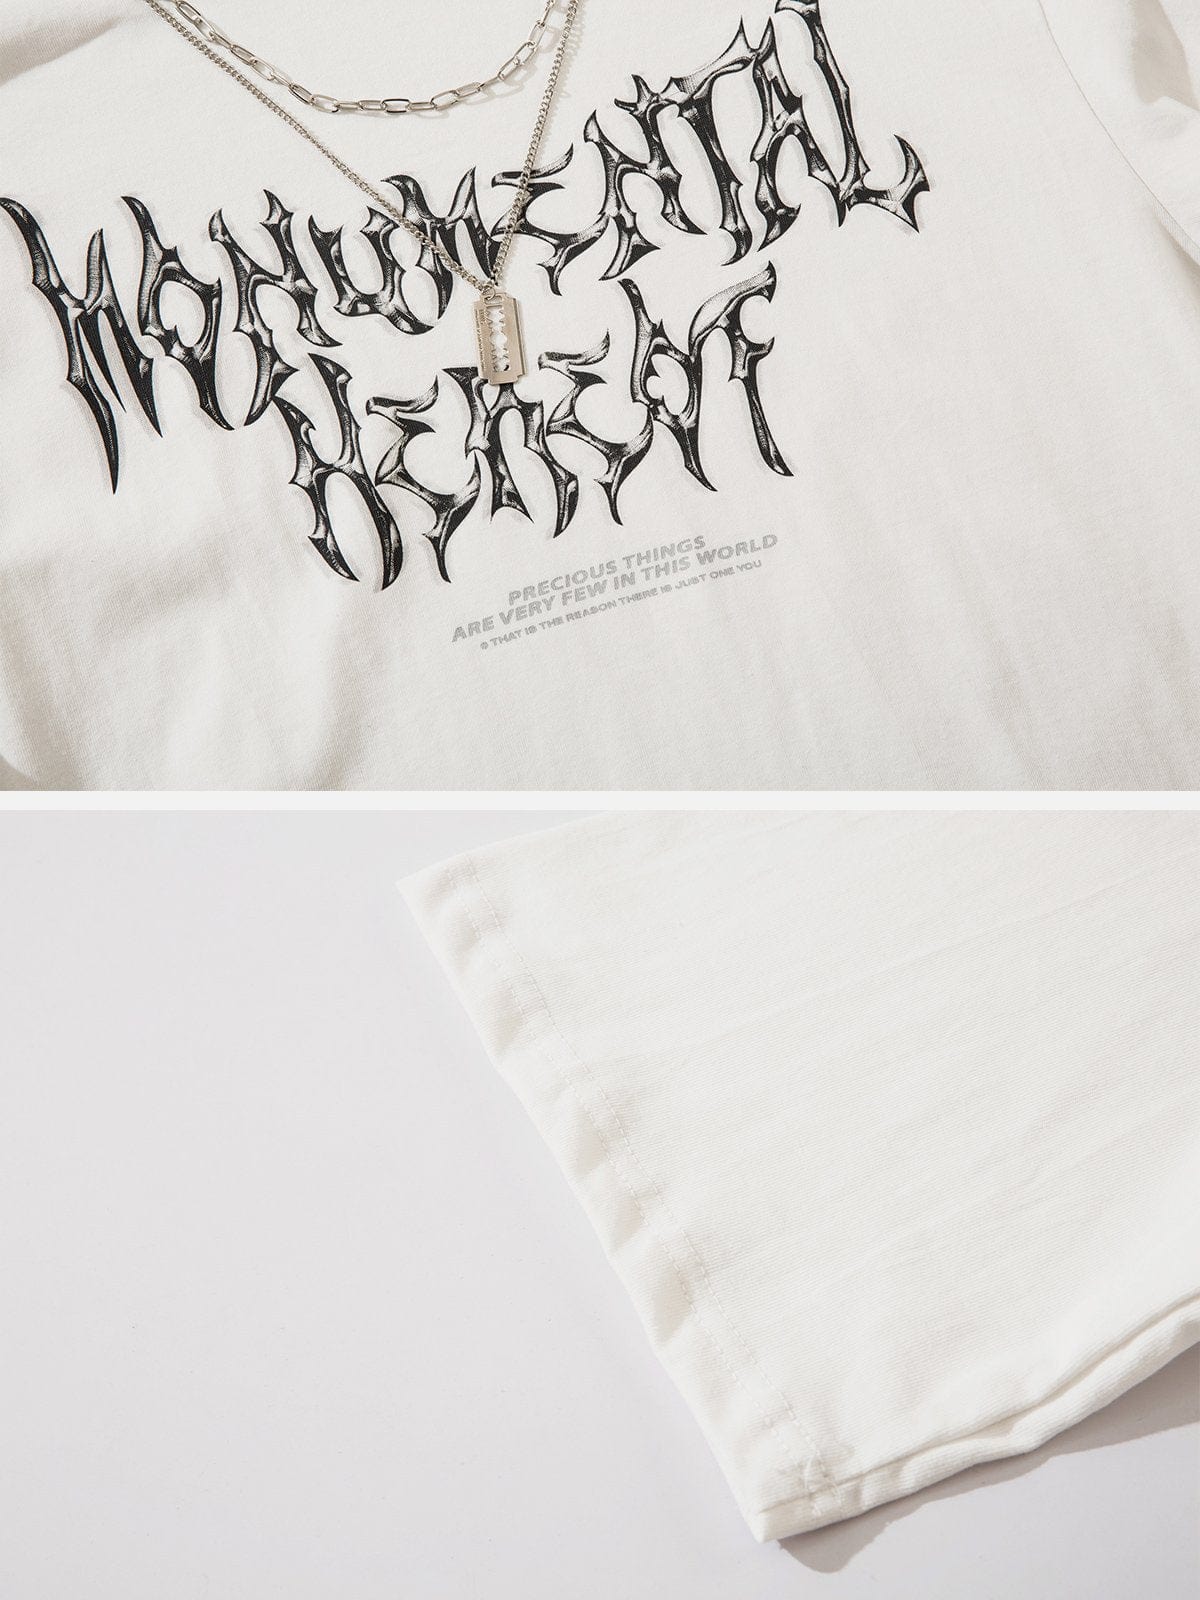 NEV Gothic Letter Print Tee